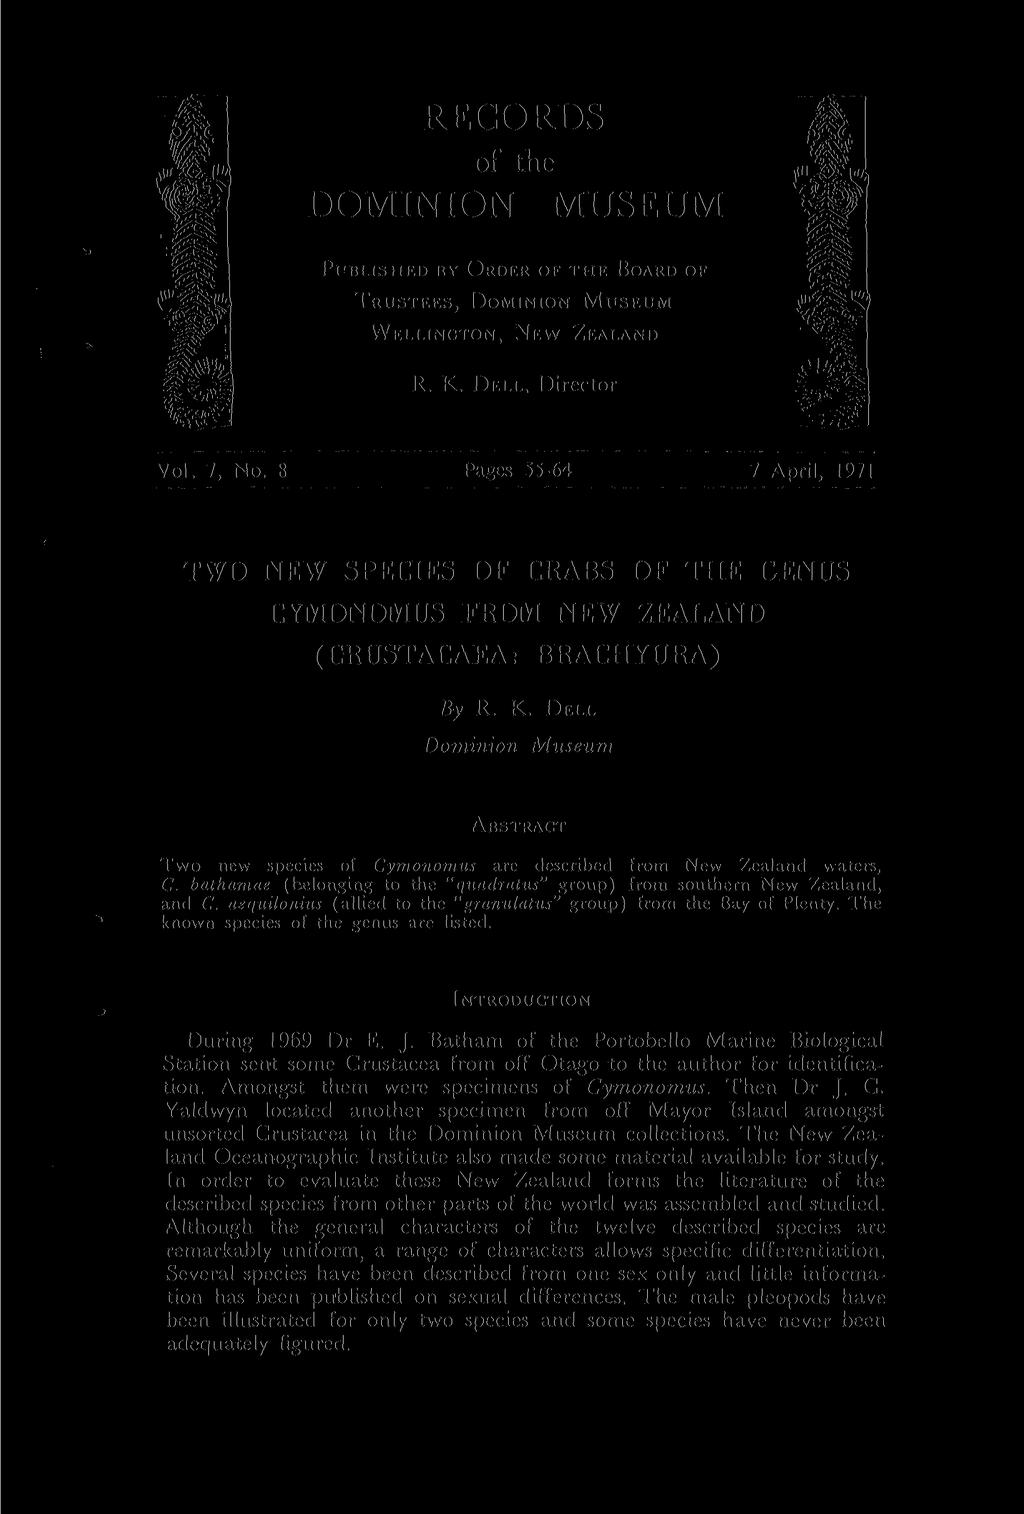 w RECORDS of the DOMINION MUSEUM PIIHI.ISHED BY ORDER OF THE HOARD OF TRUSTEES, DOMINION MUSEUM WELLINGTON, NEW ZEALAND R. K. DEI.I., Director Vol. 7, No.